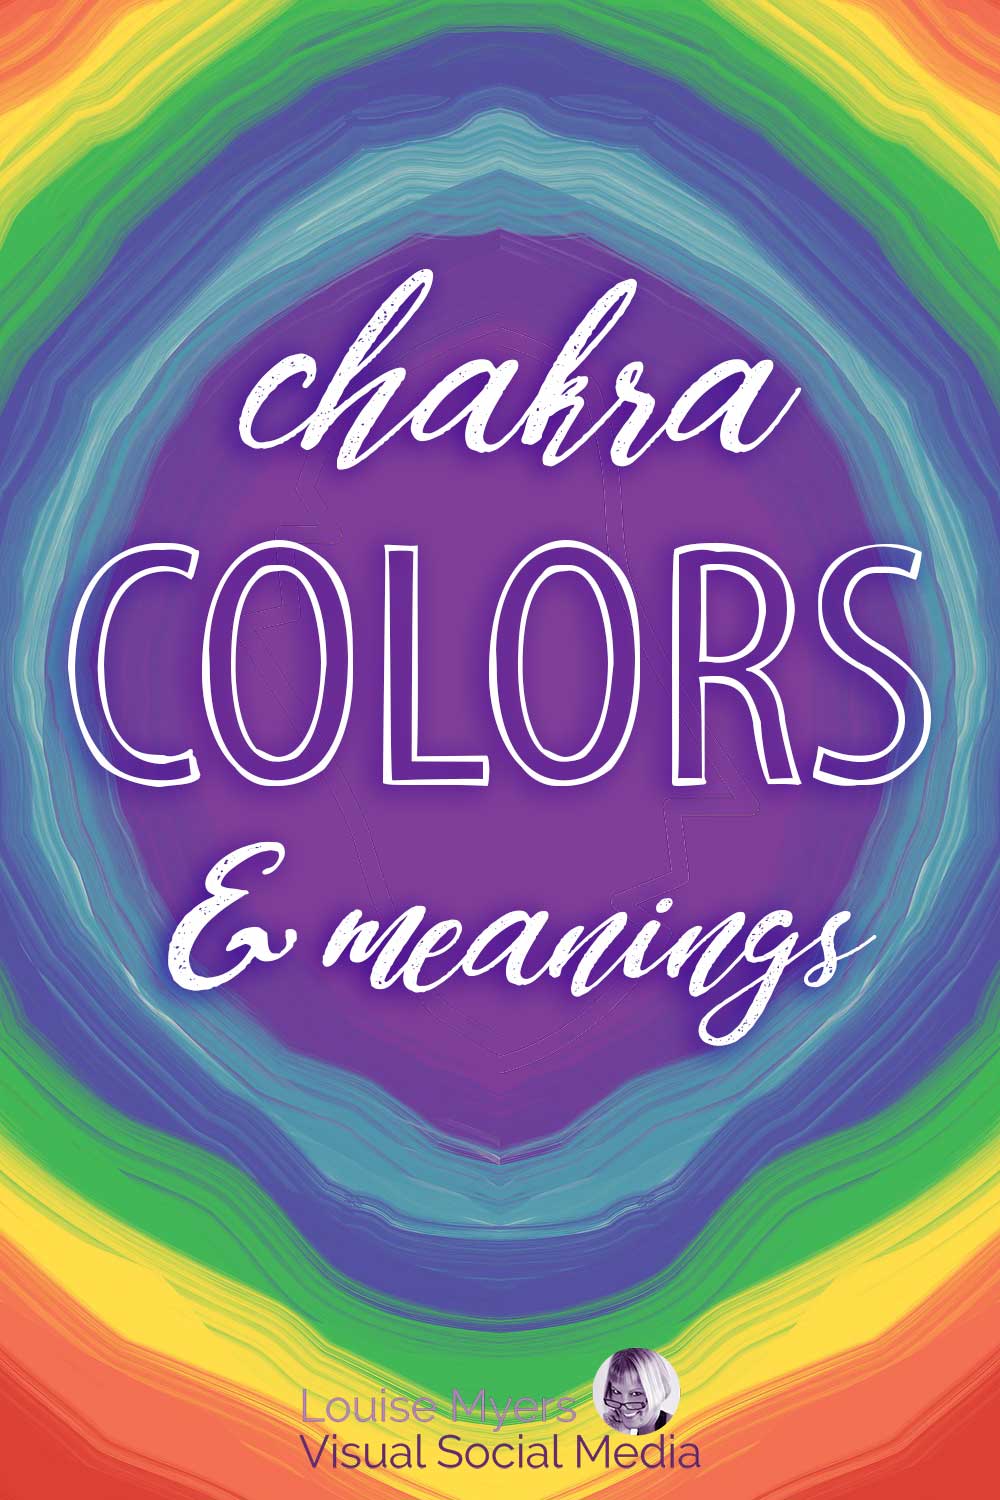 painted rainbows of colors arranged in a circle that surrounds text chakra colors and meanings.